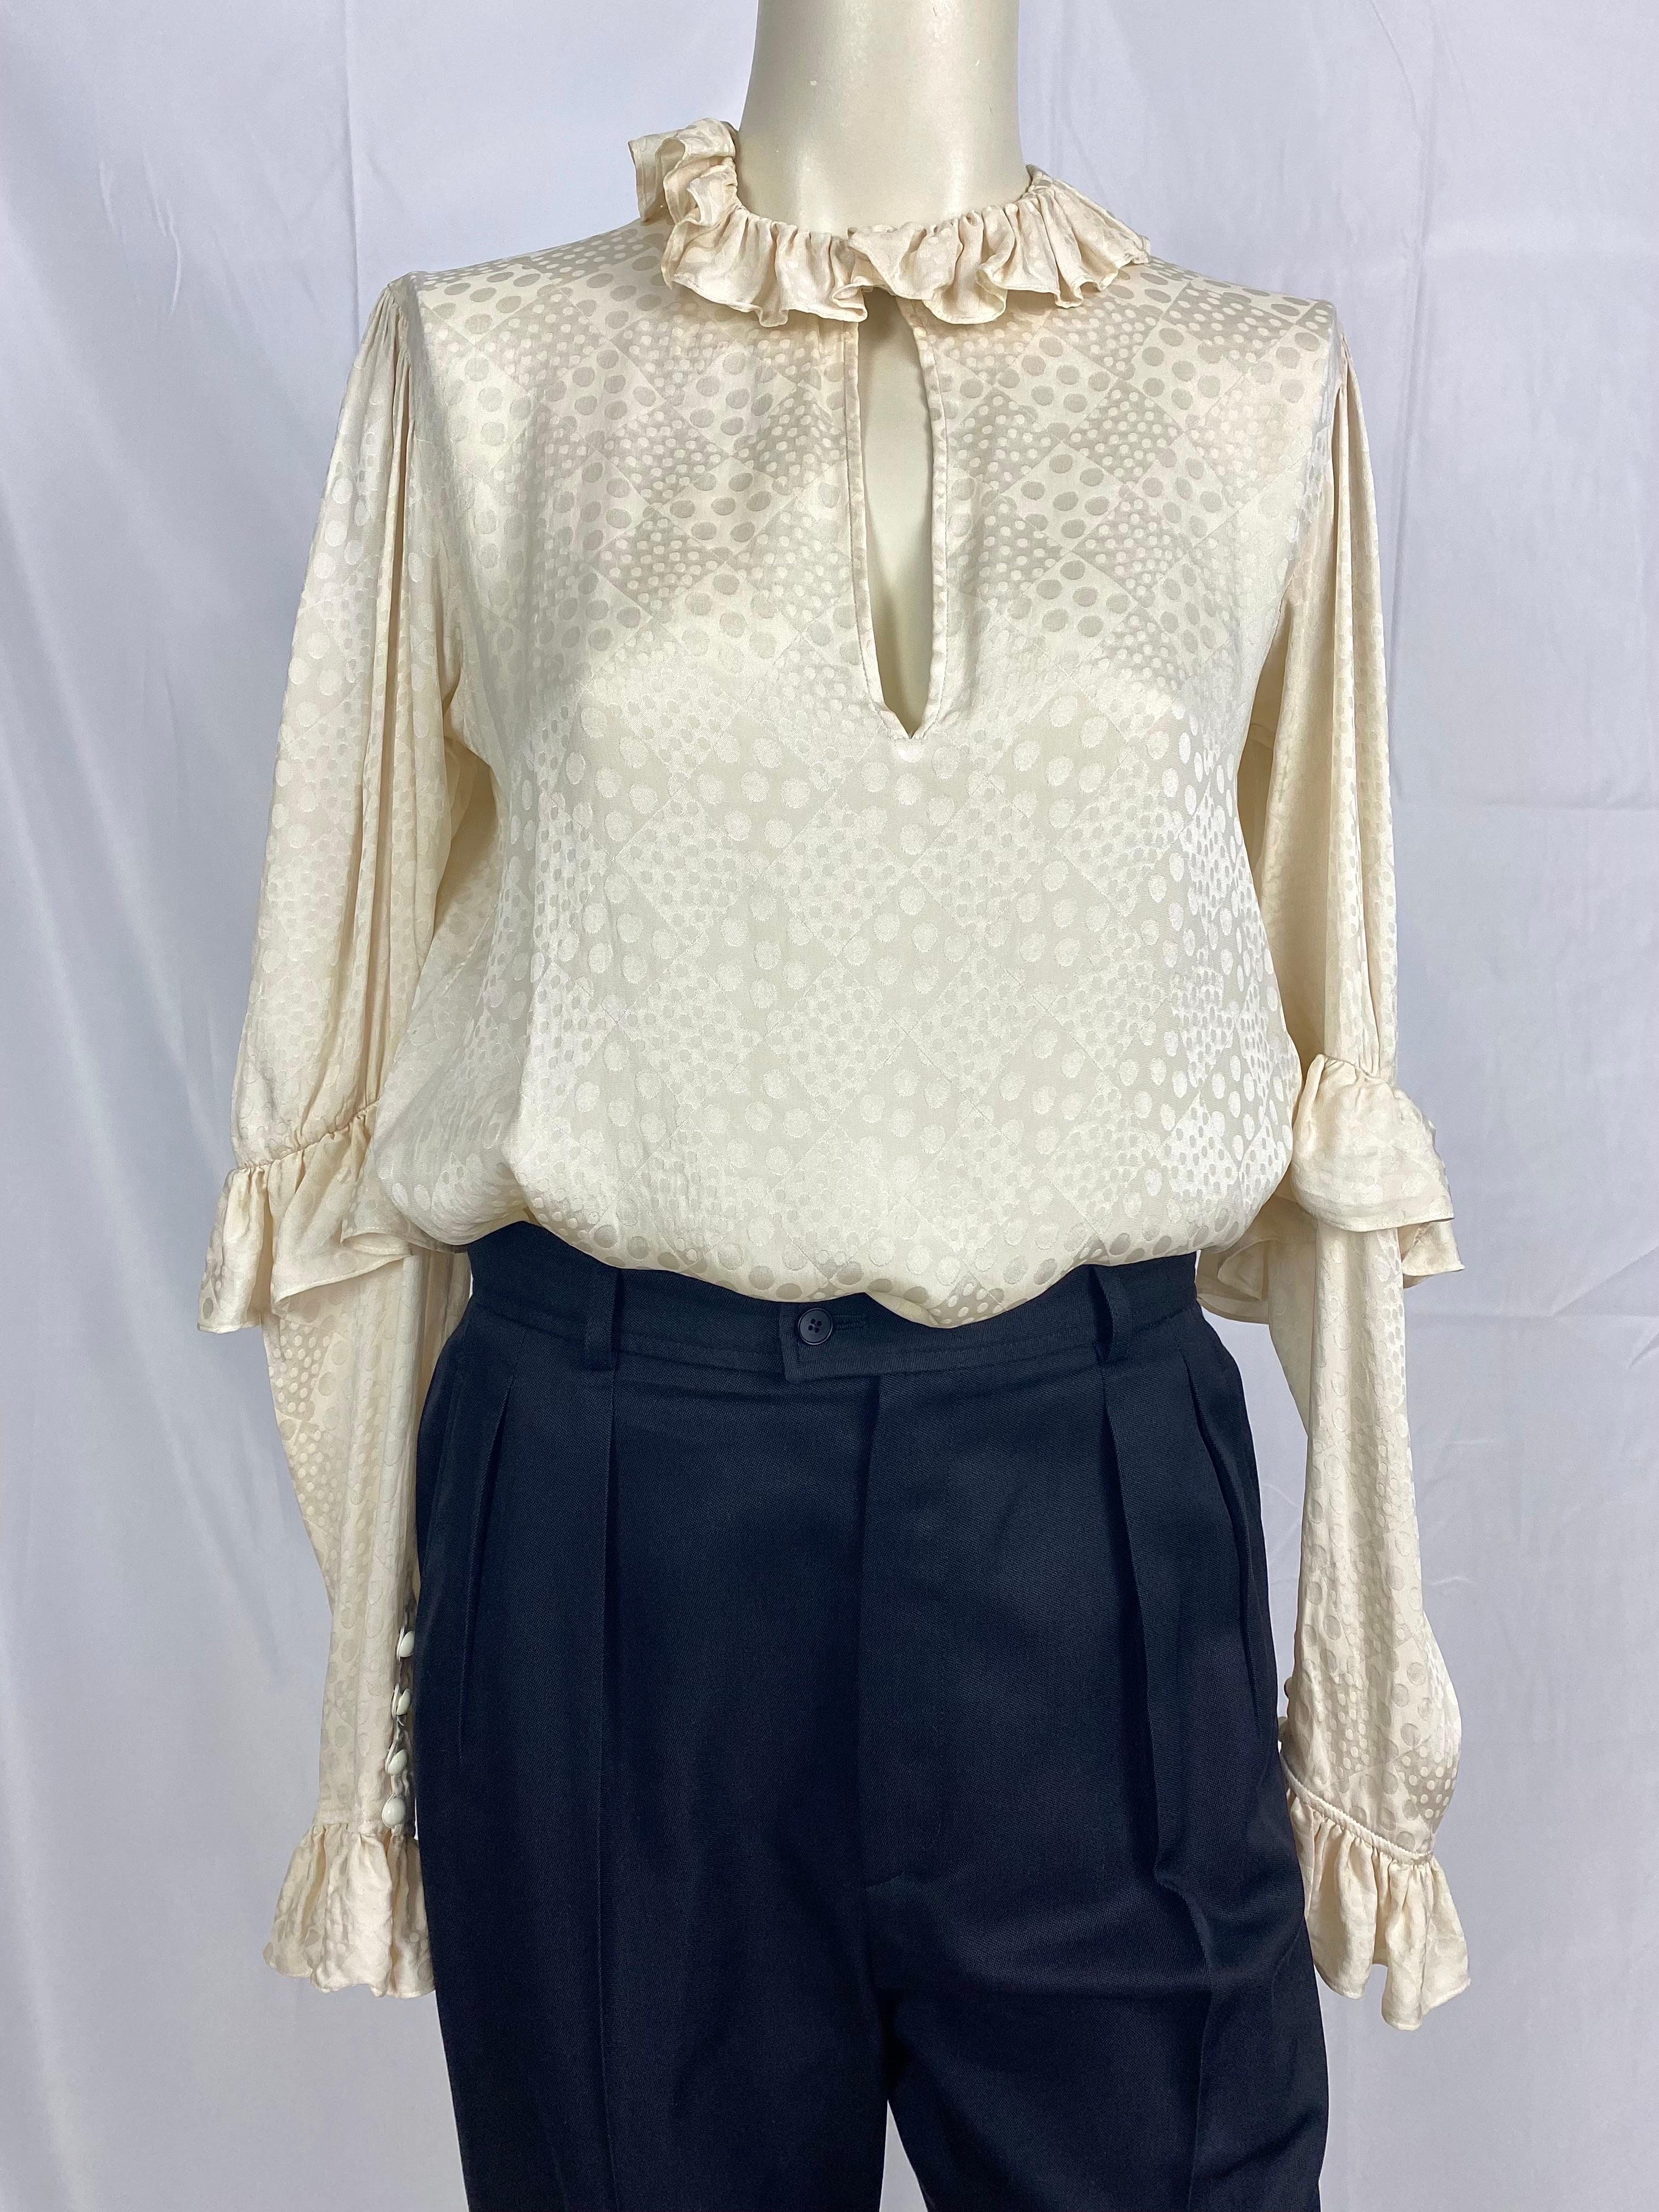 Vintage Yves Saint Laurent Rive gauche blouse inSilk from 1970, tone-on-tone beaded patterns, pretty Pierrot-style ruffled collar closing with a small round button.
Ruffles at elbows and wrists.
4 buttons close the sleeves of the blouse.
Size